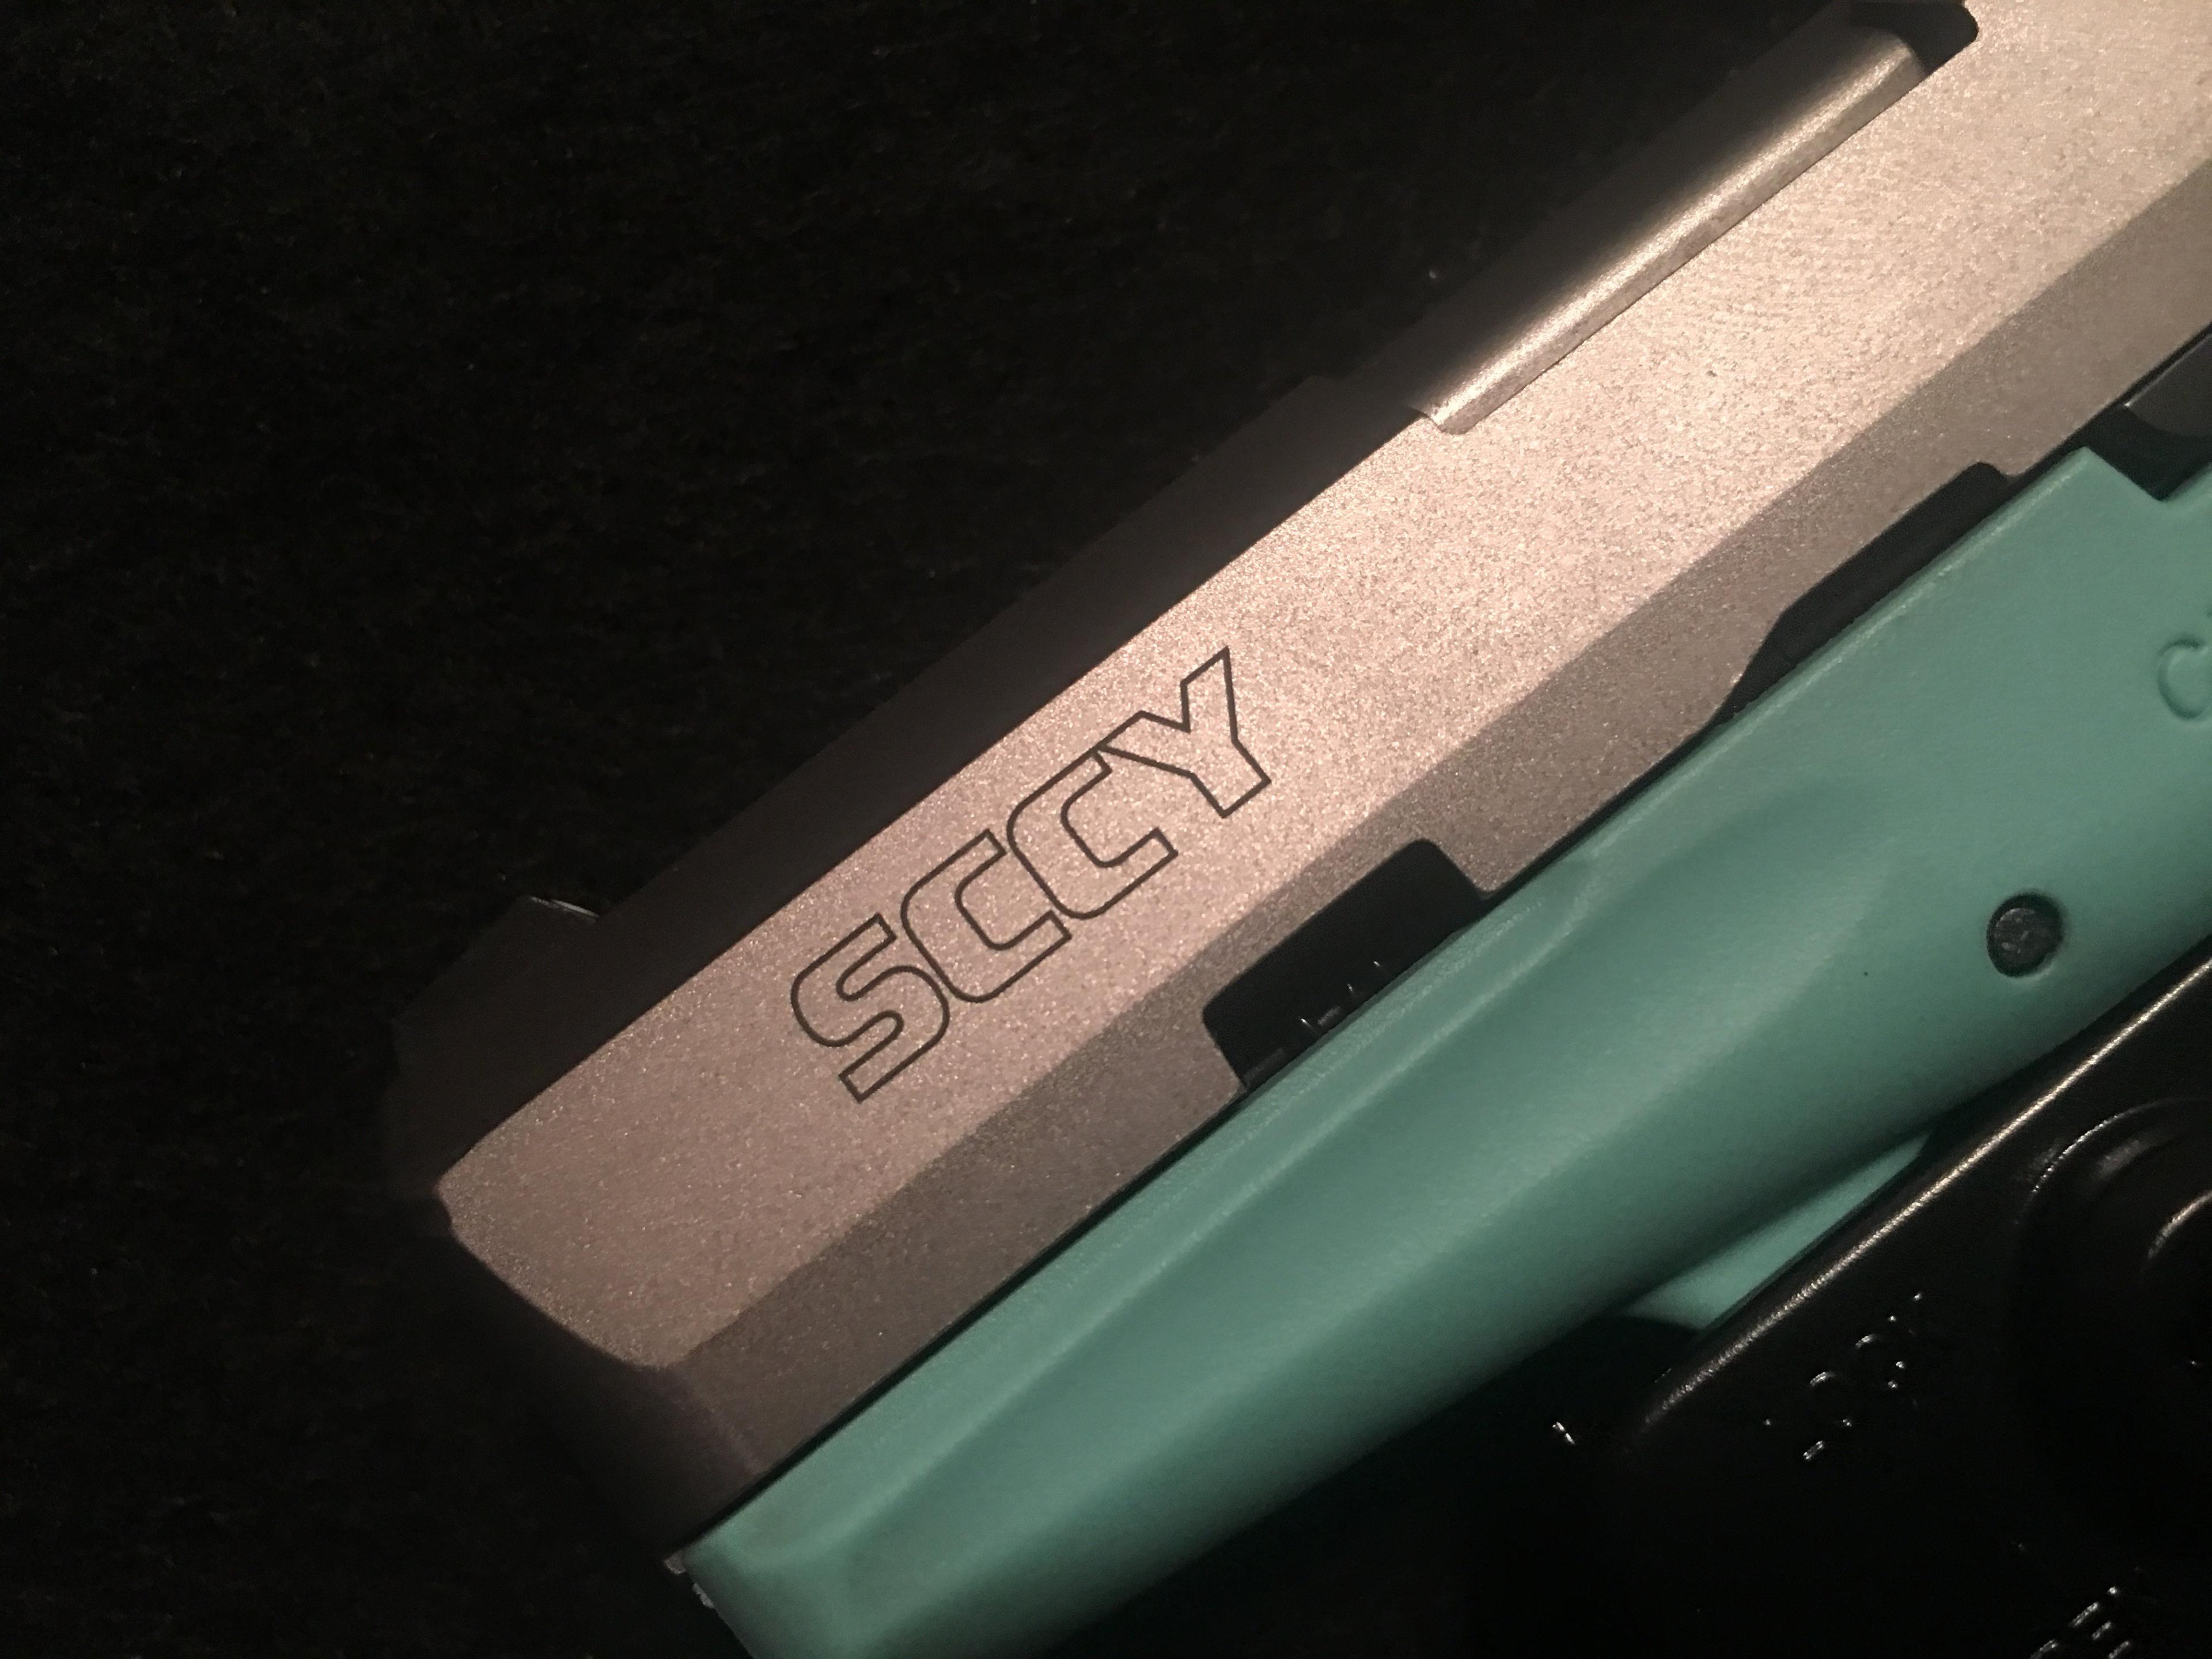 SCCY 9mm